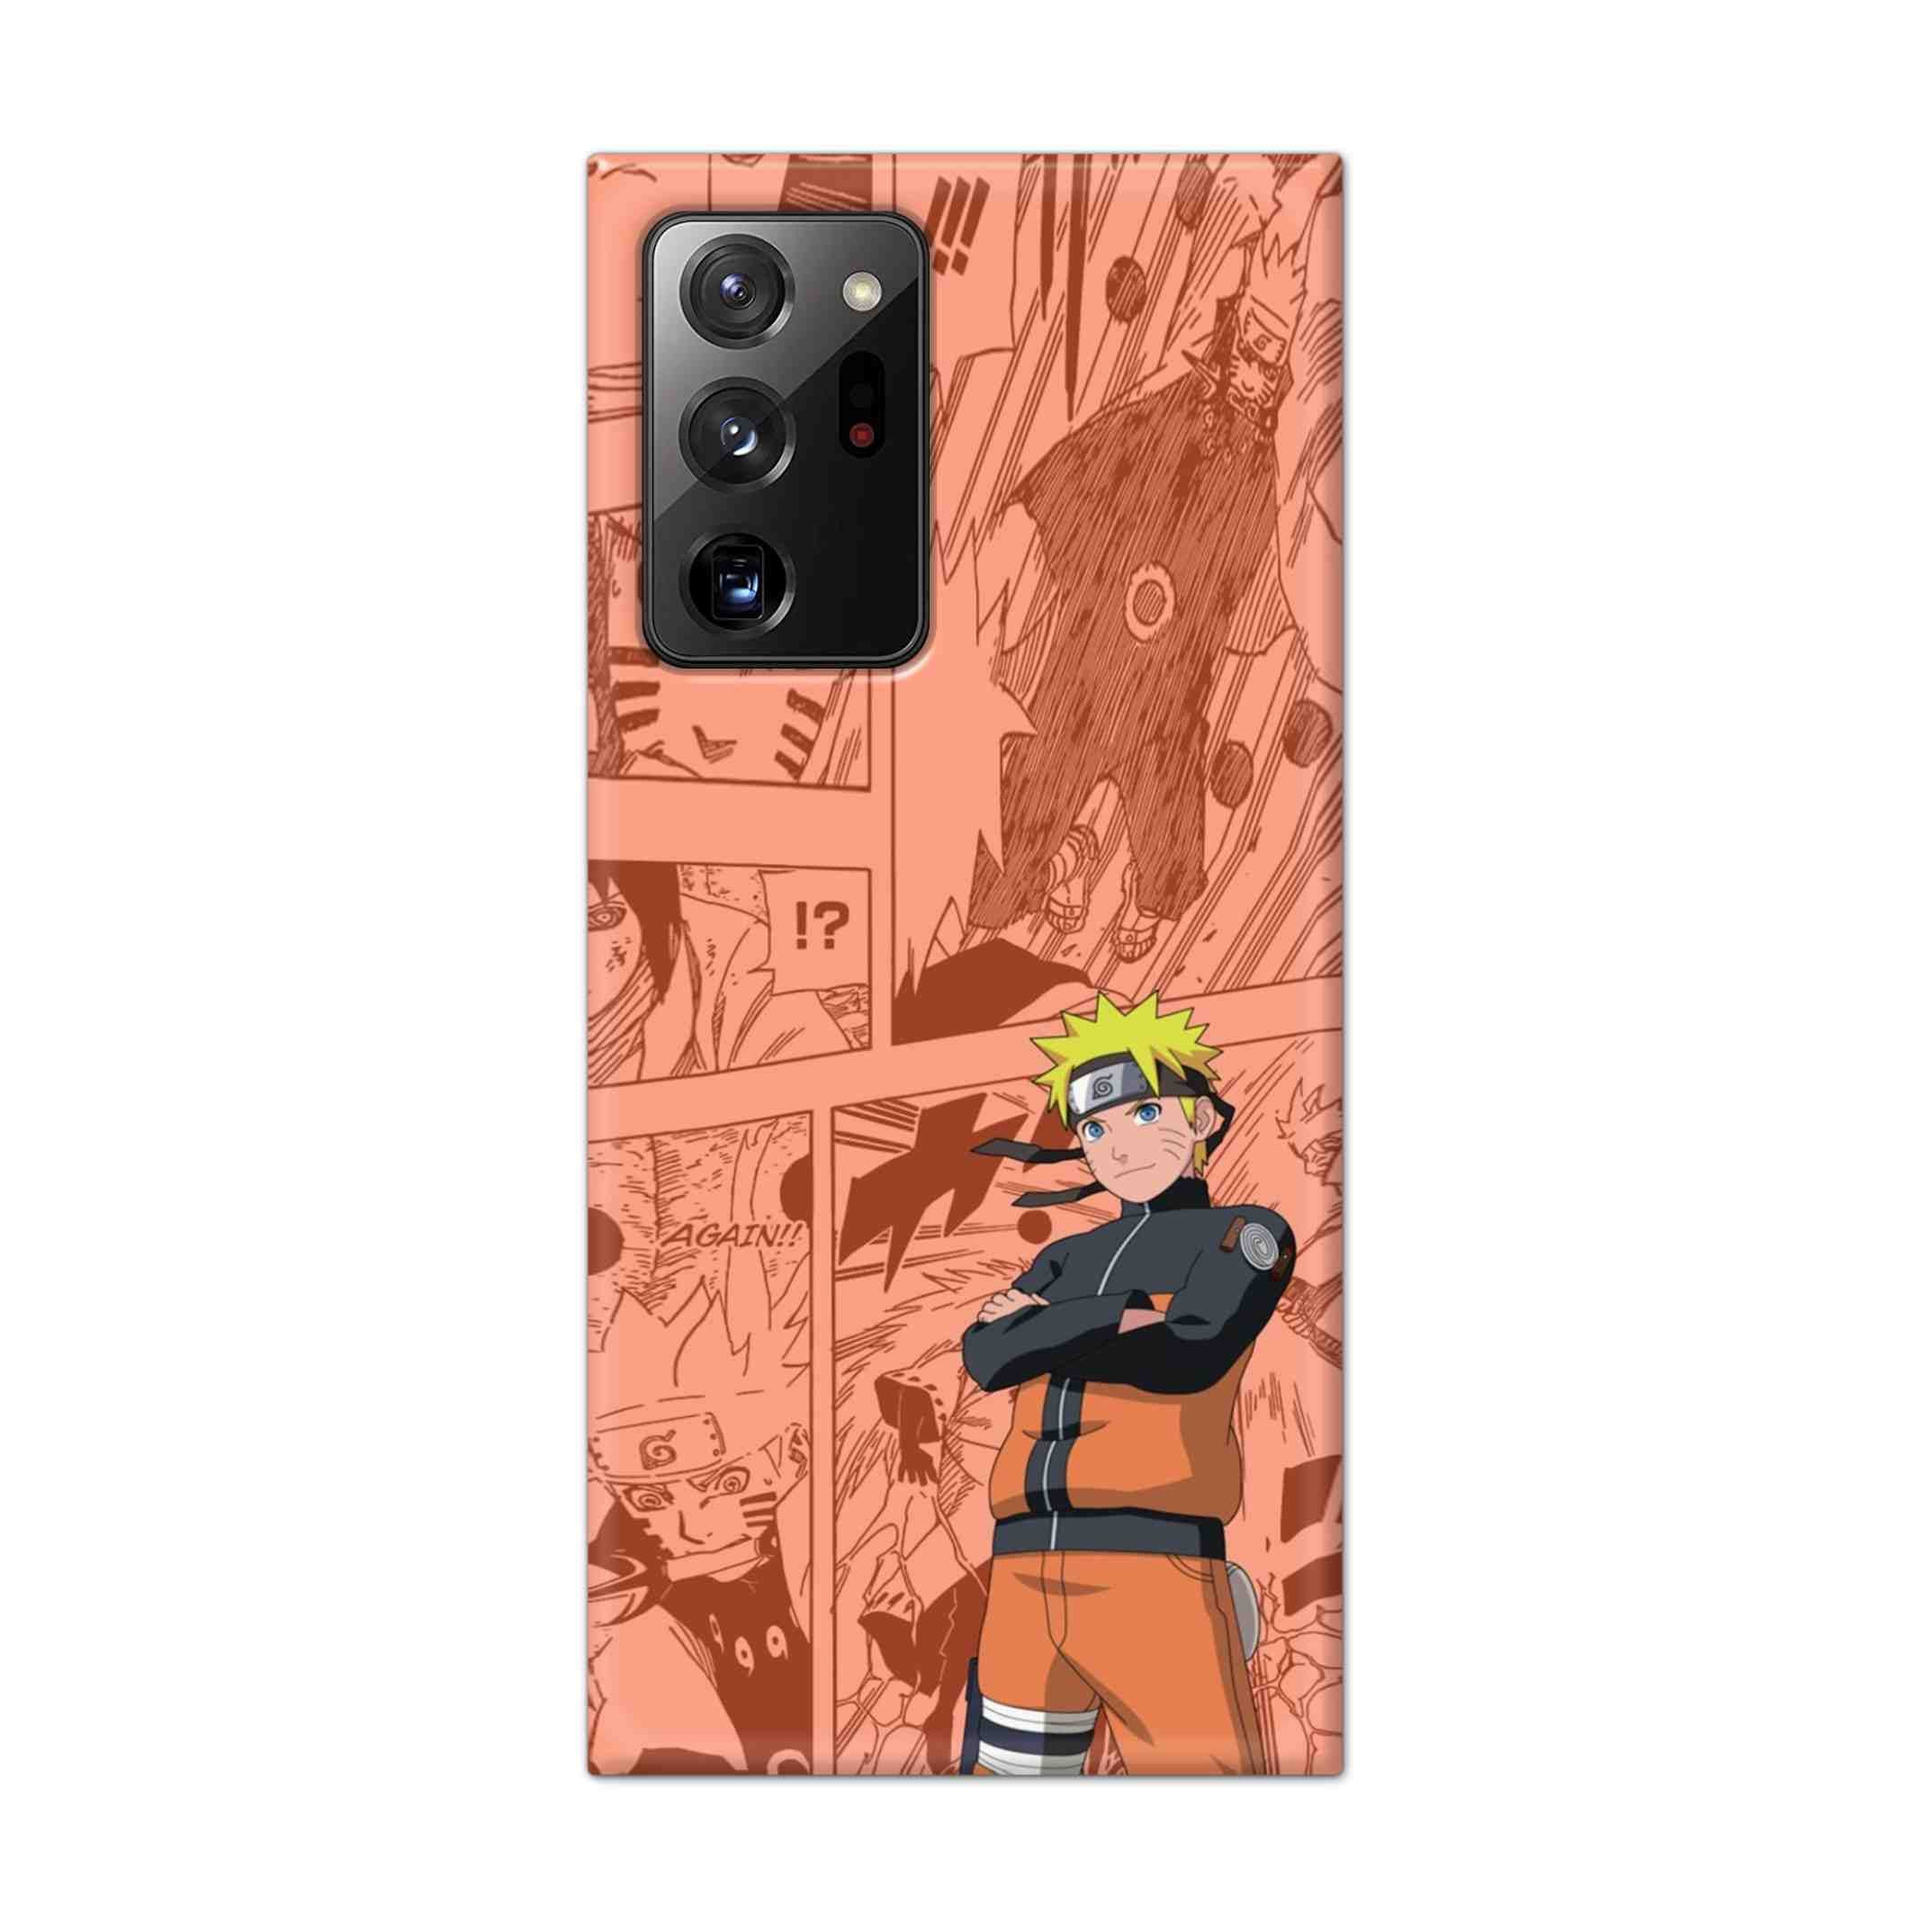 Buy Naruto Hard Back Mobile Phone Case Cover For Samsung Galaxy Note 20 Ultra Online